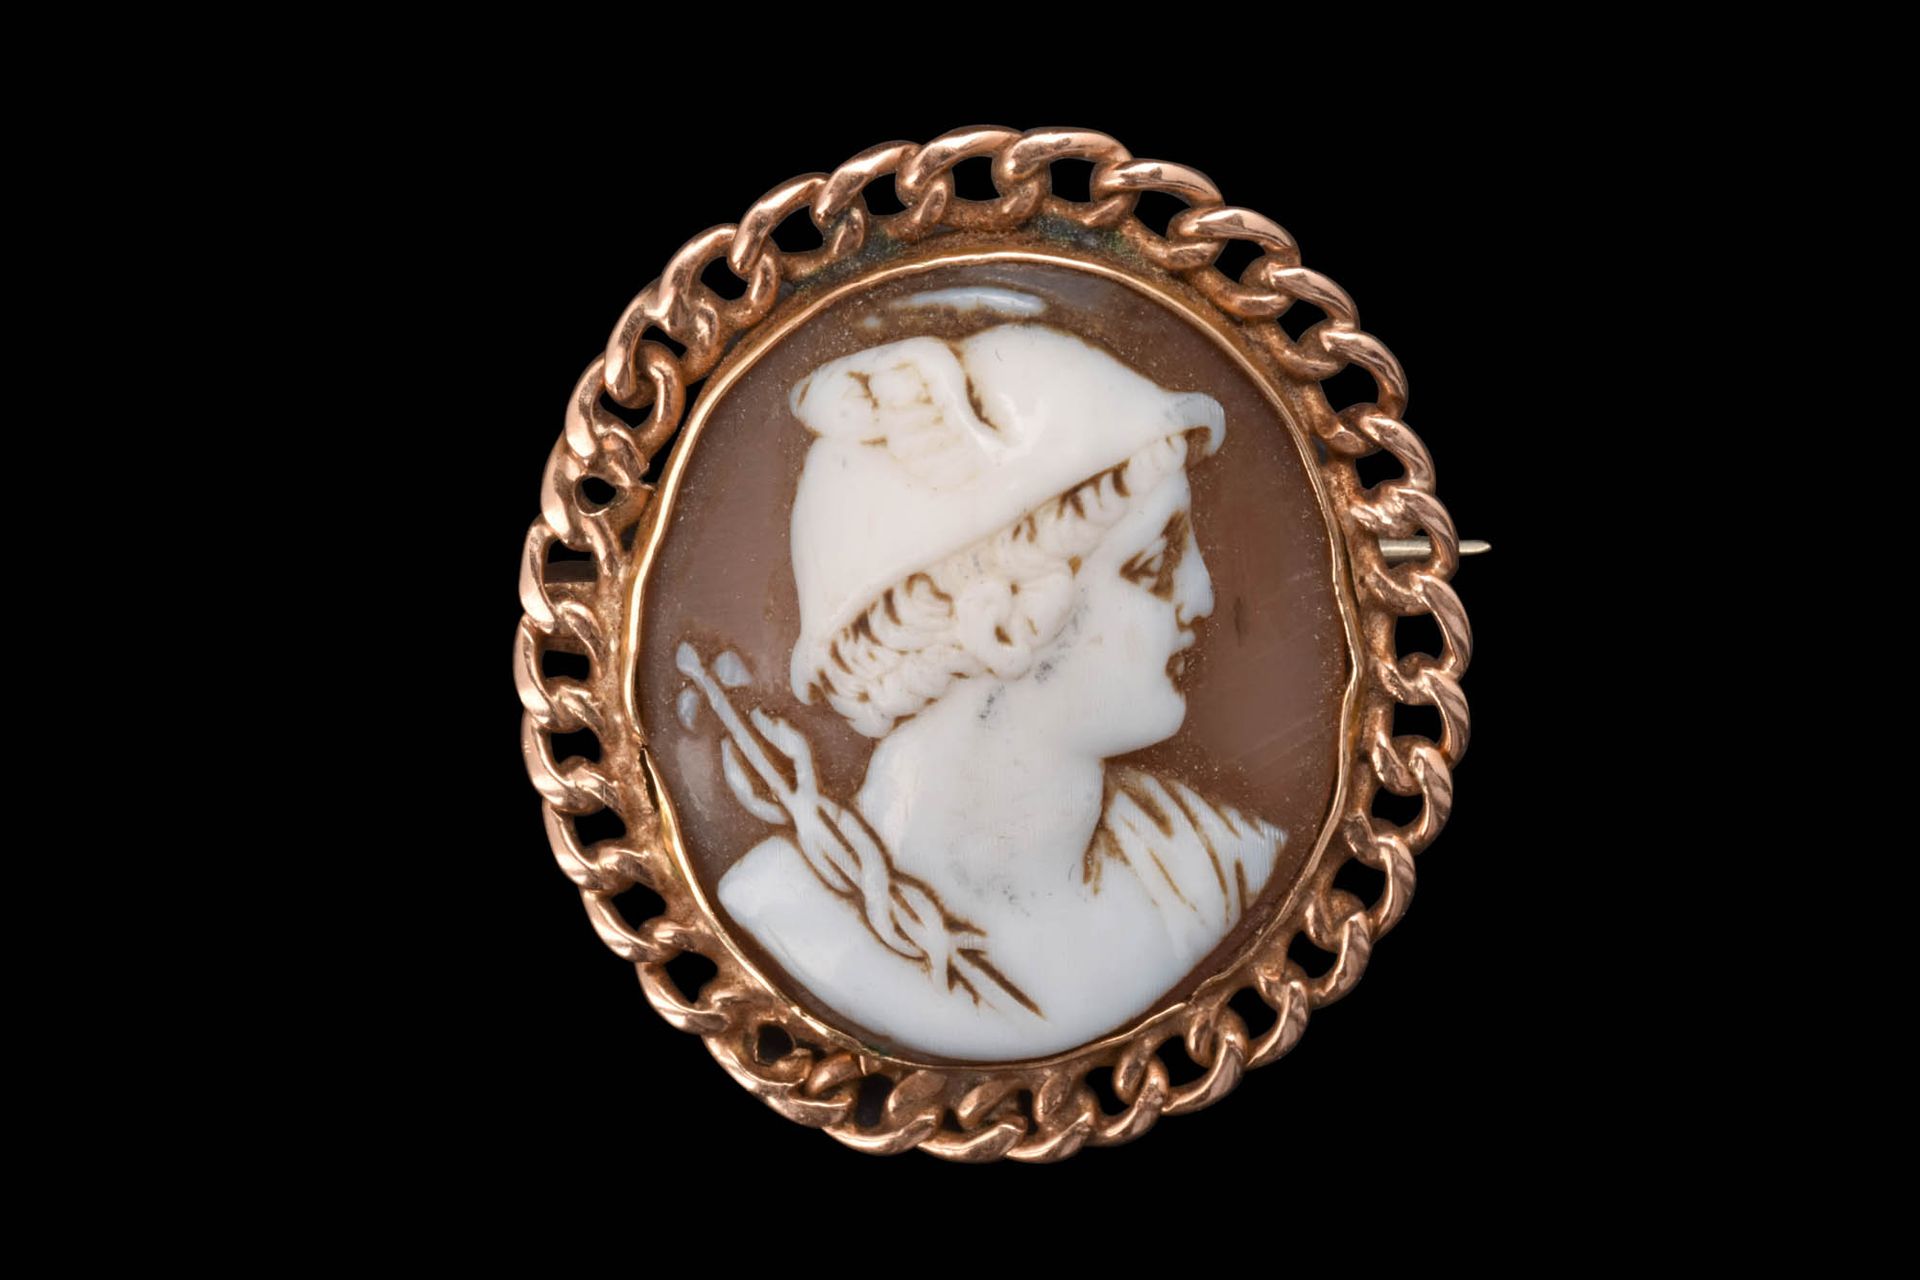 NEOCLASSICAL GOLD BROOCH WITH HERMES CAMEO Ca. AD 1700 - 1800.
Un camée remarqua&hellip;